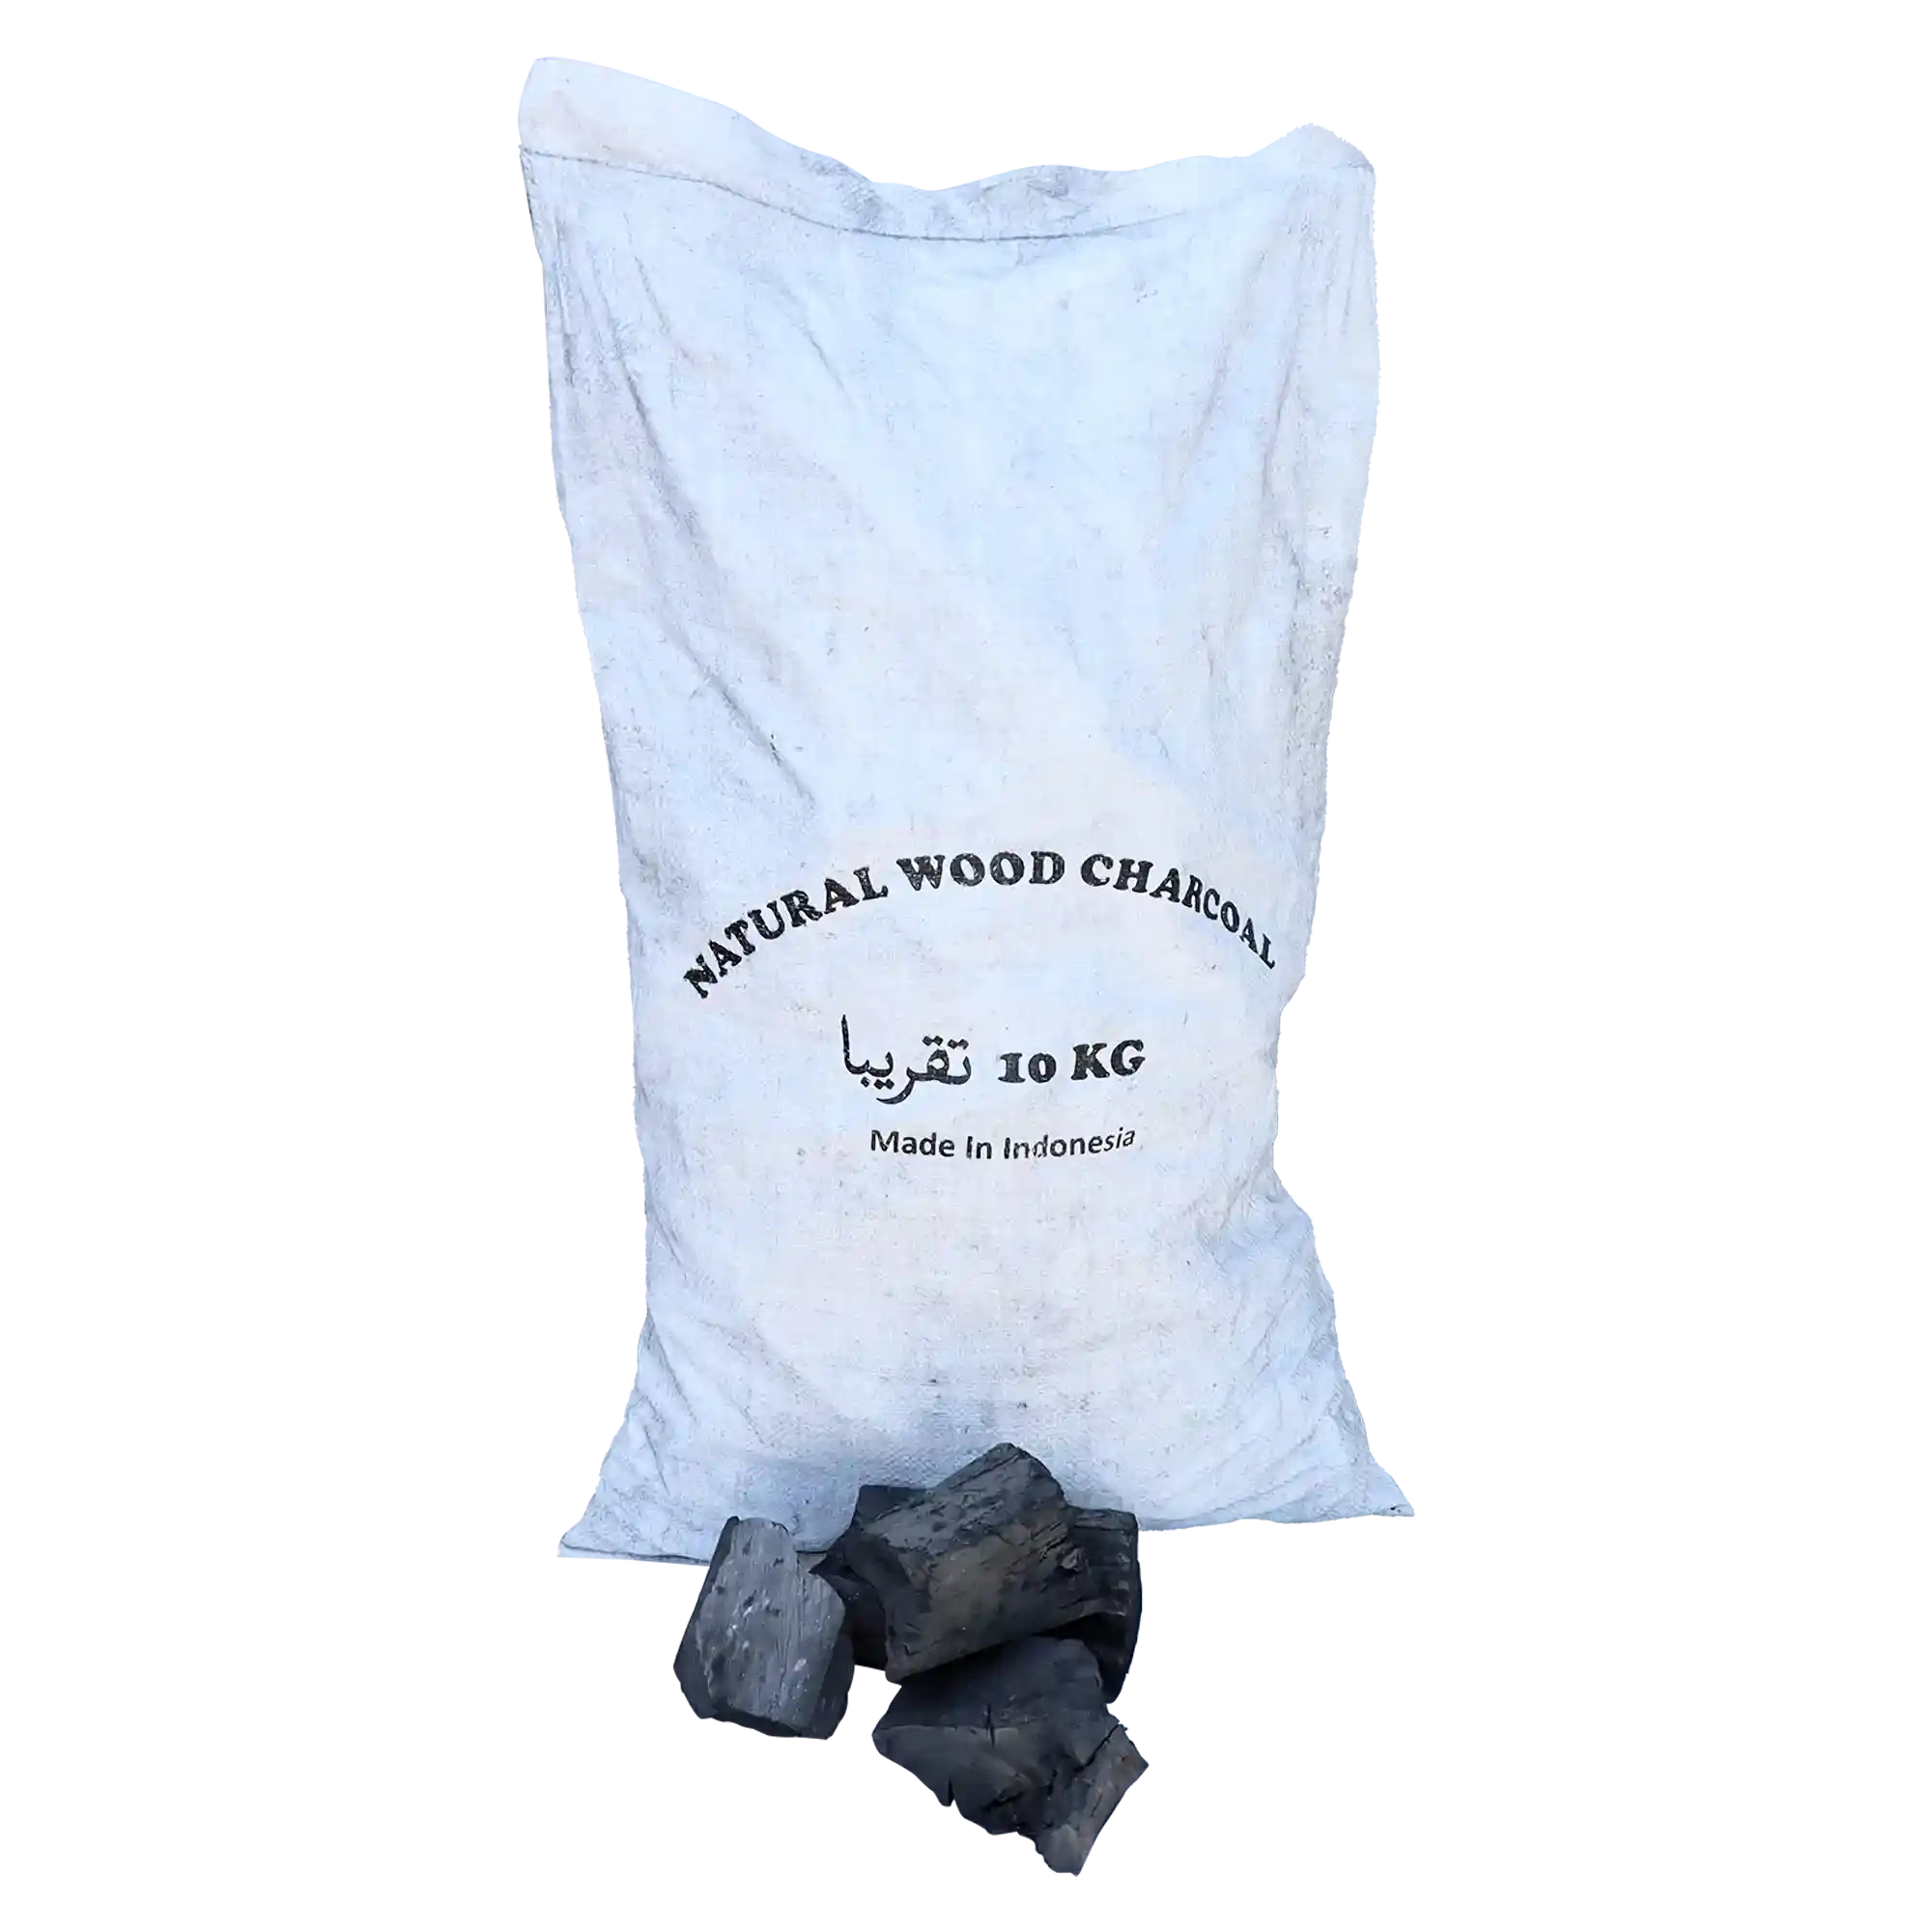 KAC - Indonesian grilled charcoal (pieces) 10 kg